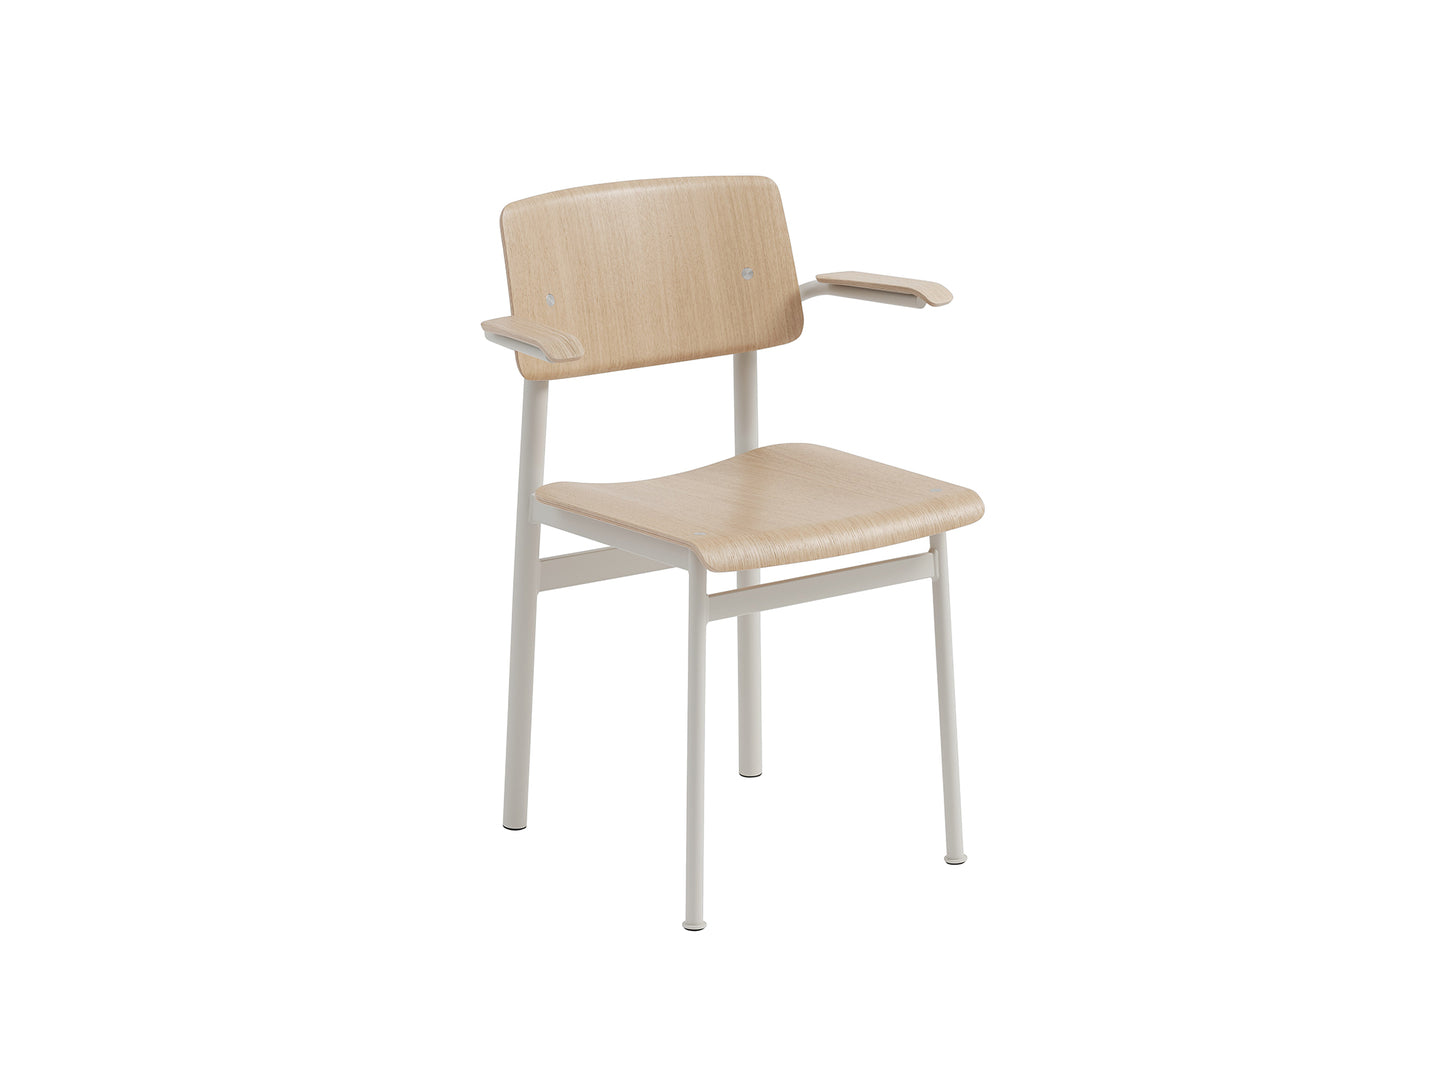 Loft Chair with Armrest by Muuto - Lacquered Oak Veneer / Grey Steel Base